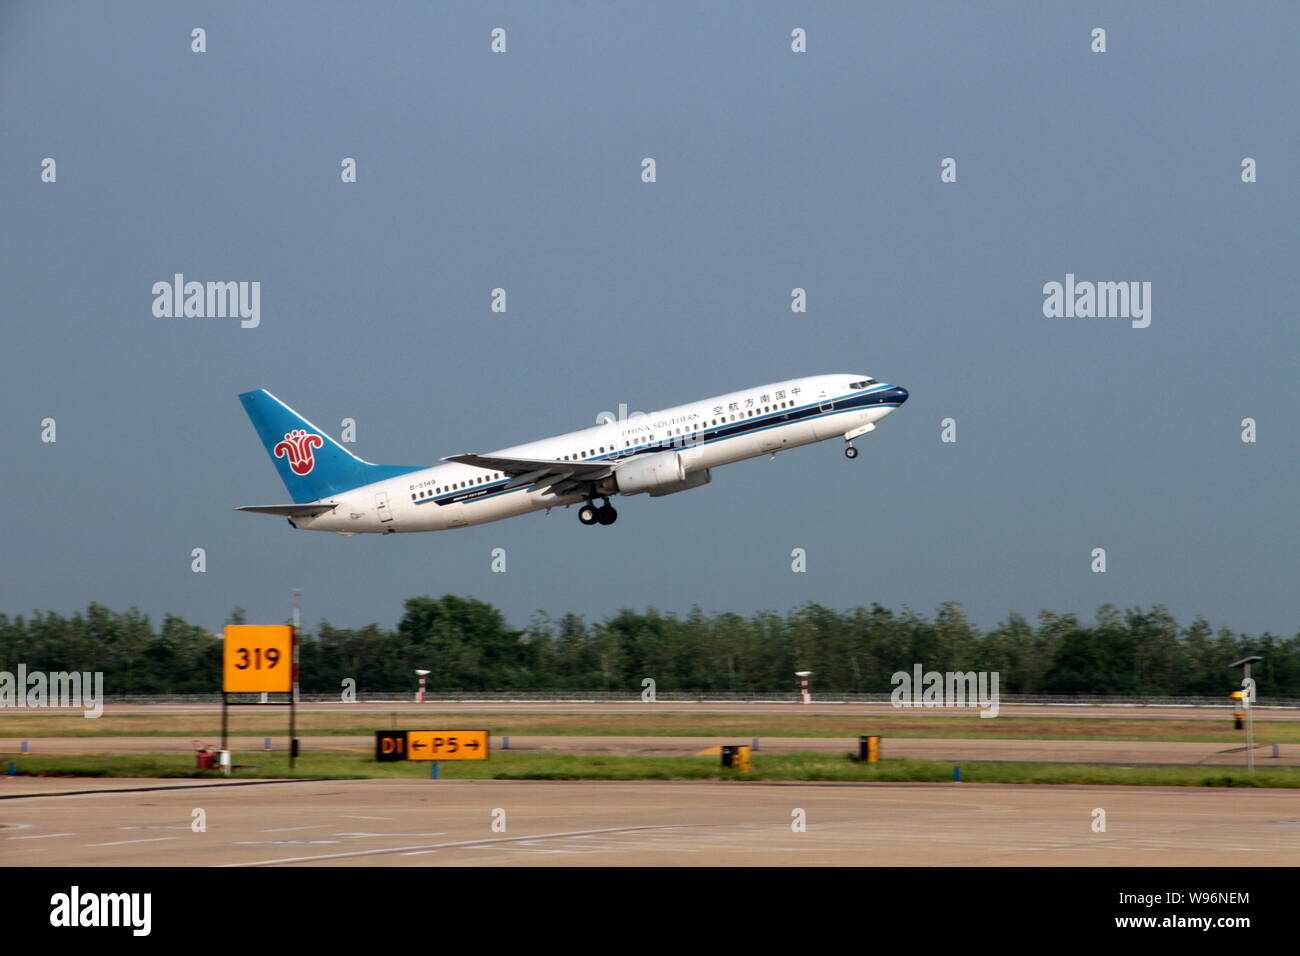 --FILE--A Boeing 737-400 jet plane of China Southern Airlines takes off at Wuhan Tianhe International Airport in Wuhan city, central Chinas Hubei prov Stock Photo